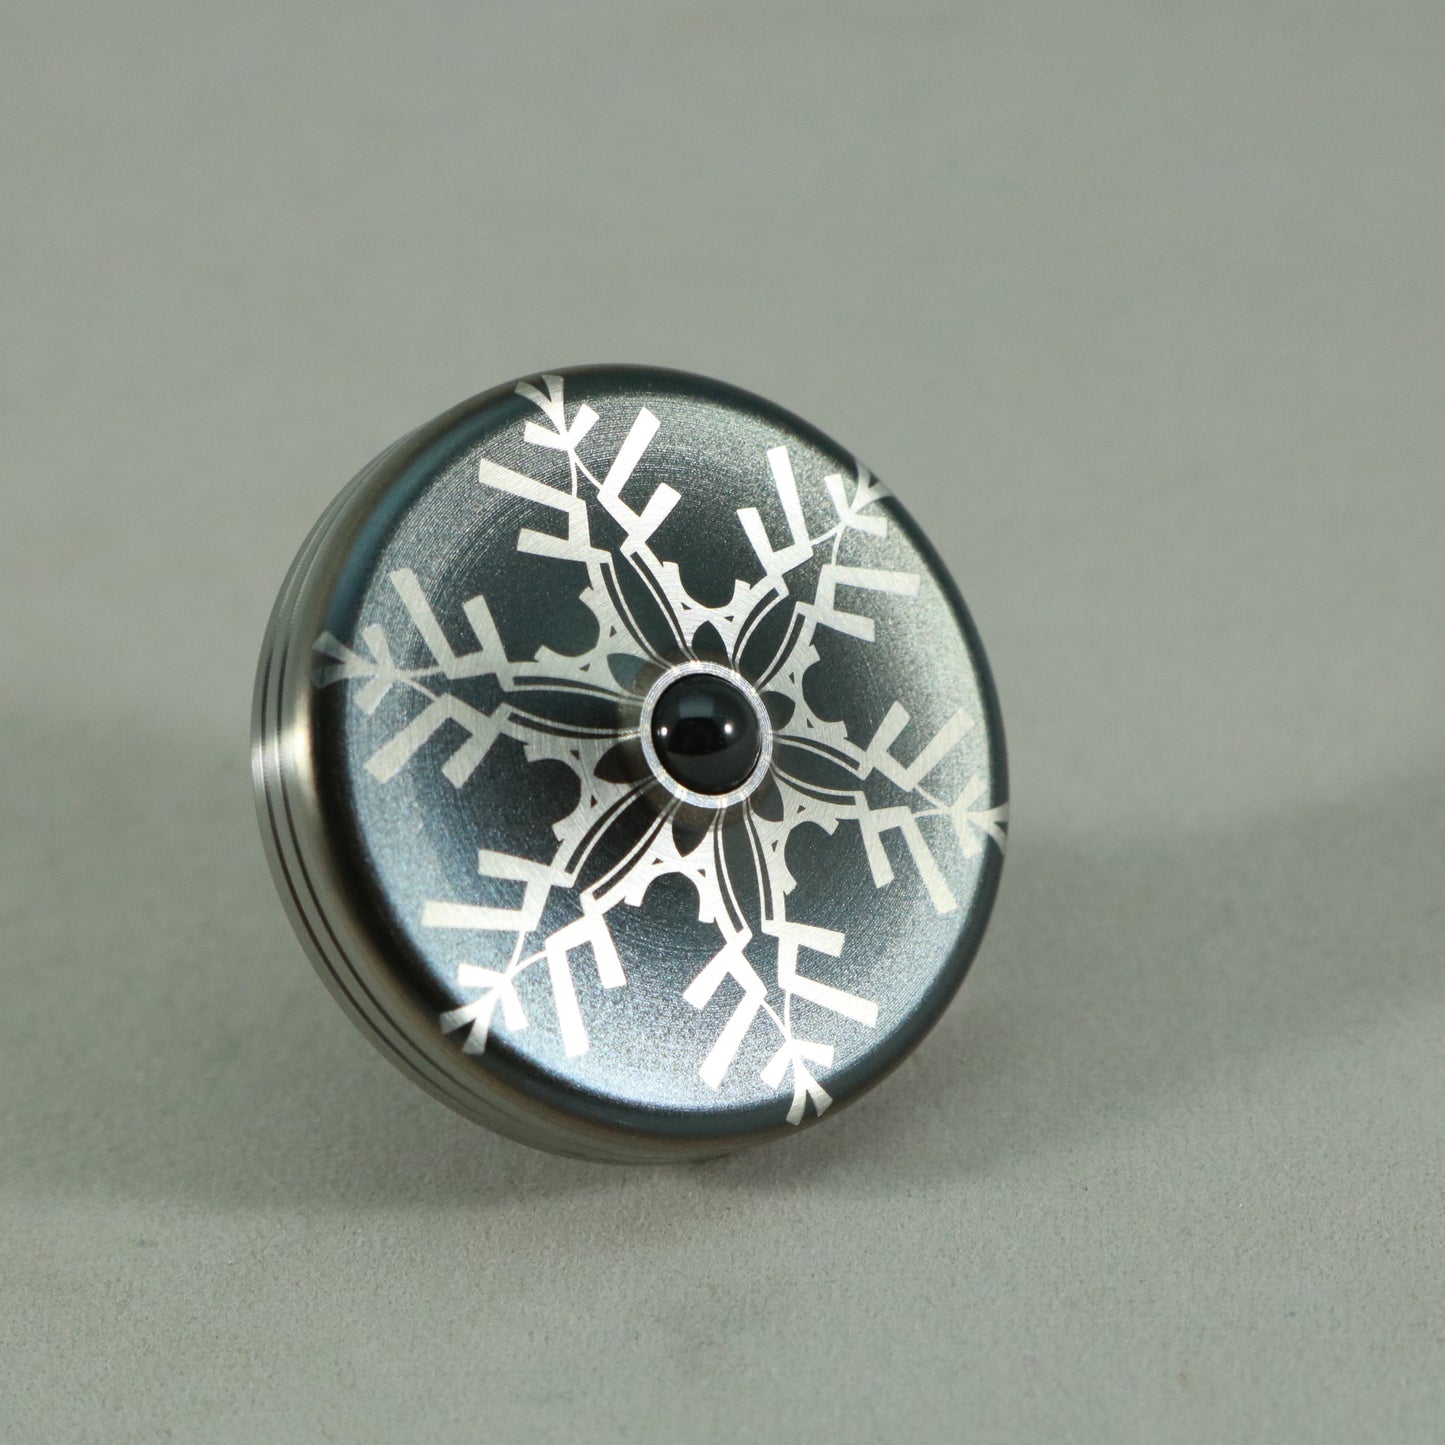 S2- Laser Etched  Inverted Snowflake on a Stainless Steel Spinning Top V2